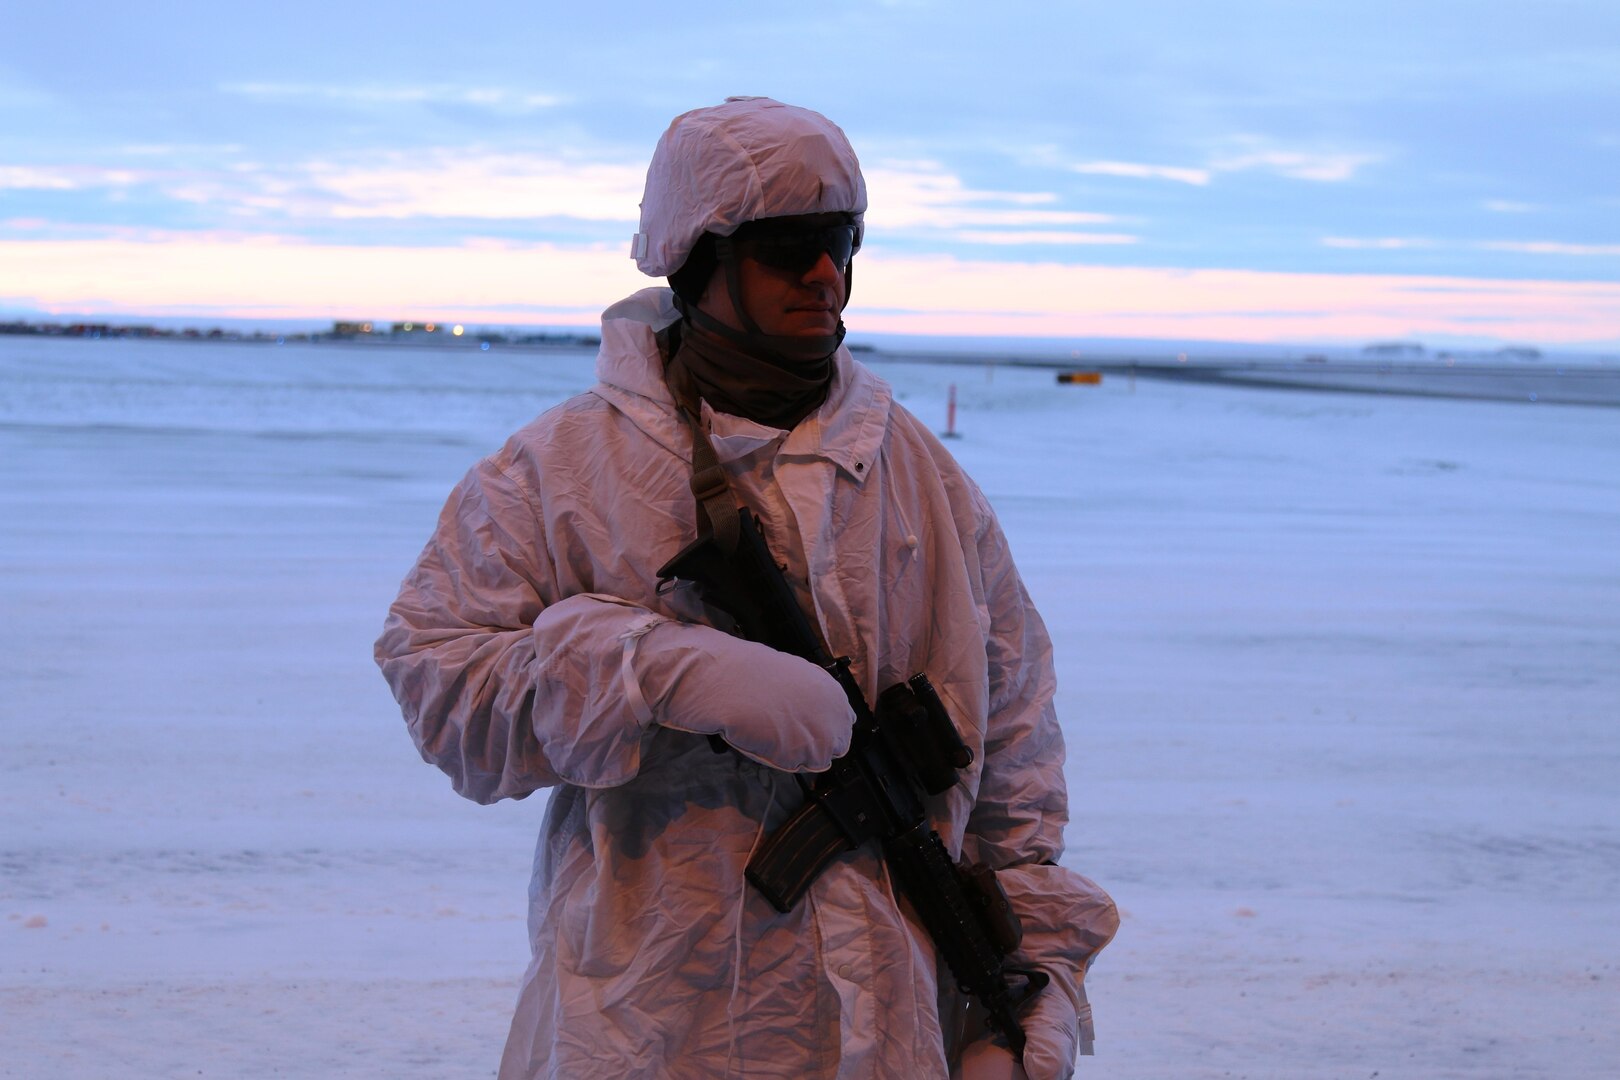 Capt. Kevin Joyce, commander of Bravo Company, 3-21 Infantry Regiment, 1st Stryker Brigade, wears snow camouflage, referred to as "overwhites," at Deadhorse, Alaska, during Operation Arctic Pegasus, Nov. 4, 2015. Arctic Pegasus is U.S. Army Alaska's annual joint exercise designed to test rapid-deployment and readiness in the Arctic. The exercise marks the first time Strykers have deployed above the Arctic Circle. 1st Stryker Brigade Combat Team is the Army's northernmost unit and has the unique capability to deploy and operate in extreme cold regions. (Photo by Capt. Richard Packer, U.S. Army Alaska Public Affairs)